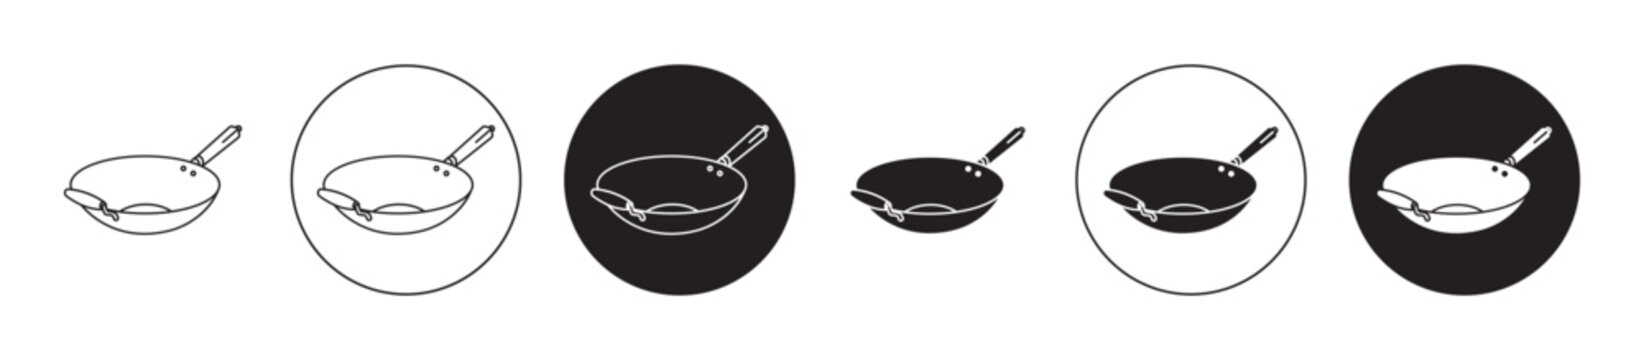 wok icon set. chinese food fry wok vector symbol in black filled and outlined style.